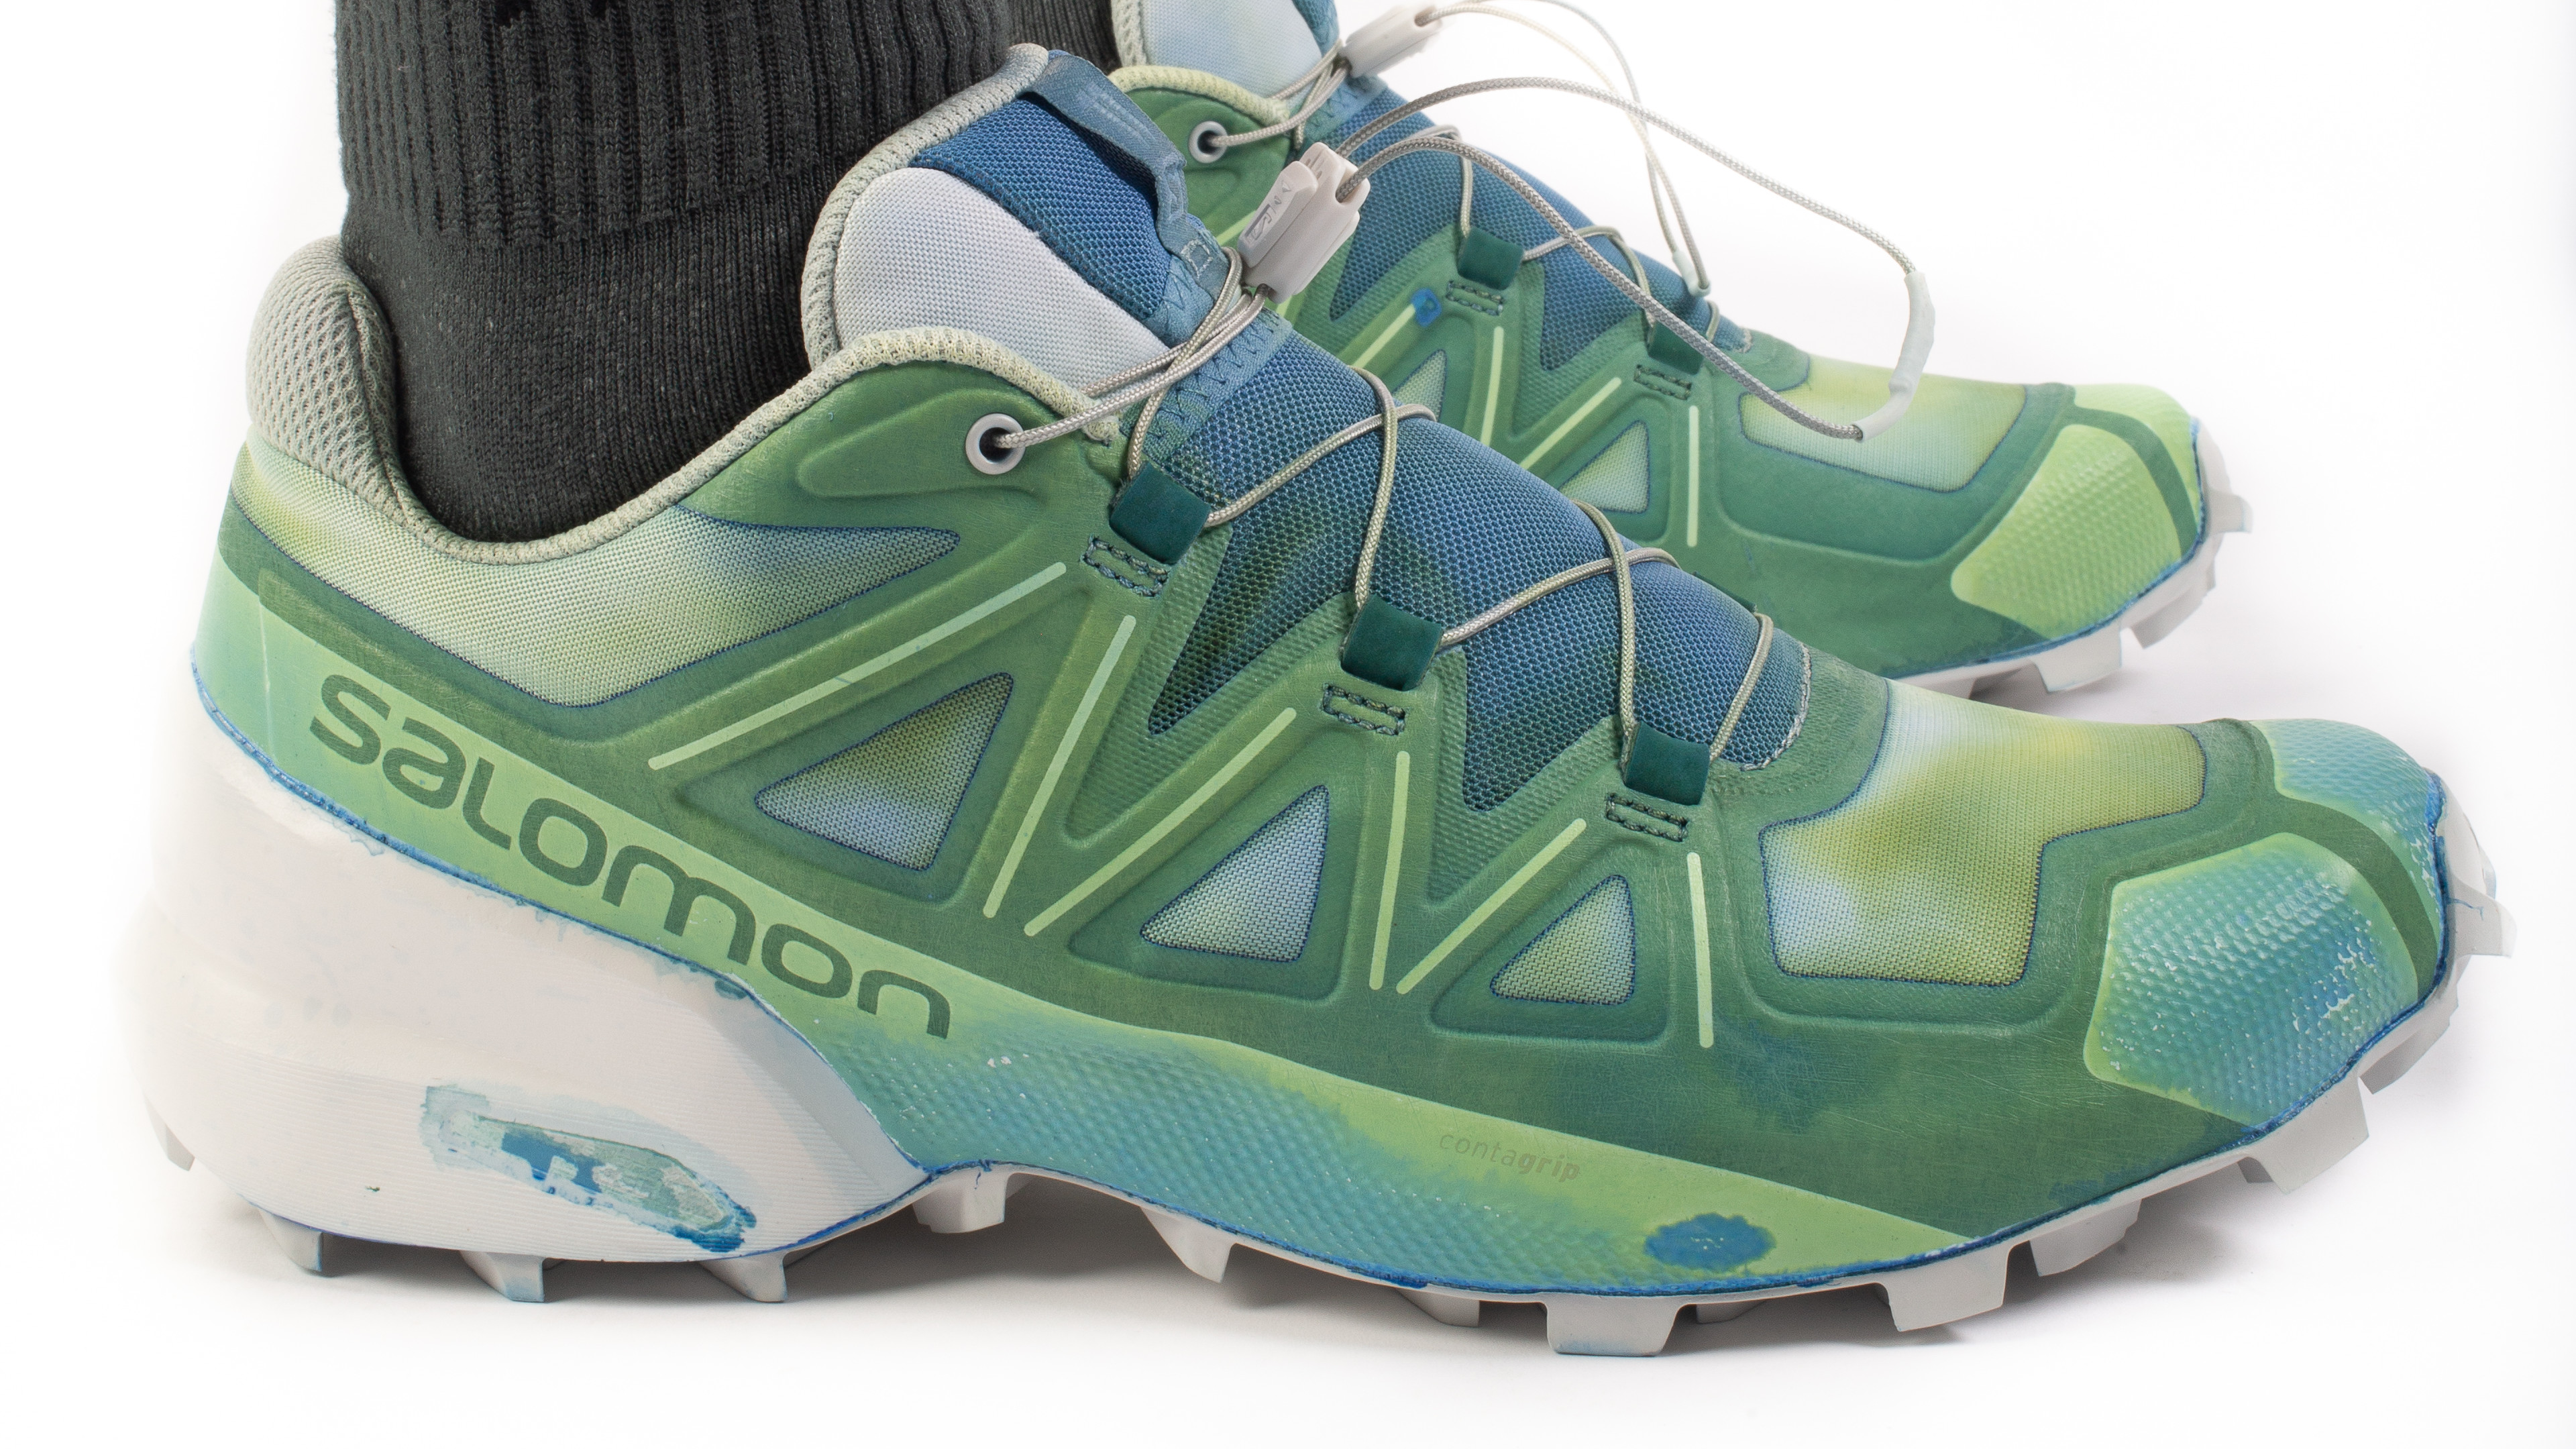 Octrooi Dom Pas op 11 by BBS x Salomon Collection Foot Locker Greenhouse 11 Release Date |  Sole Collector